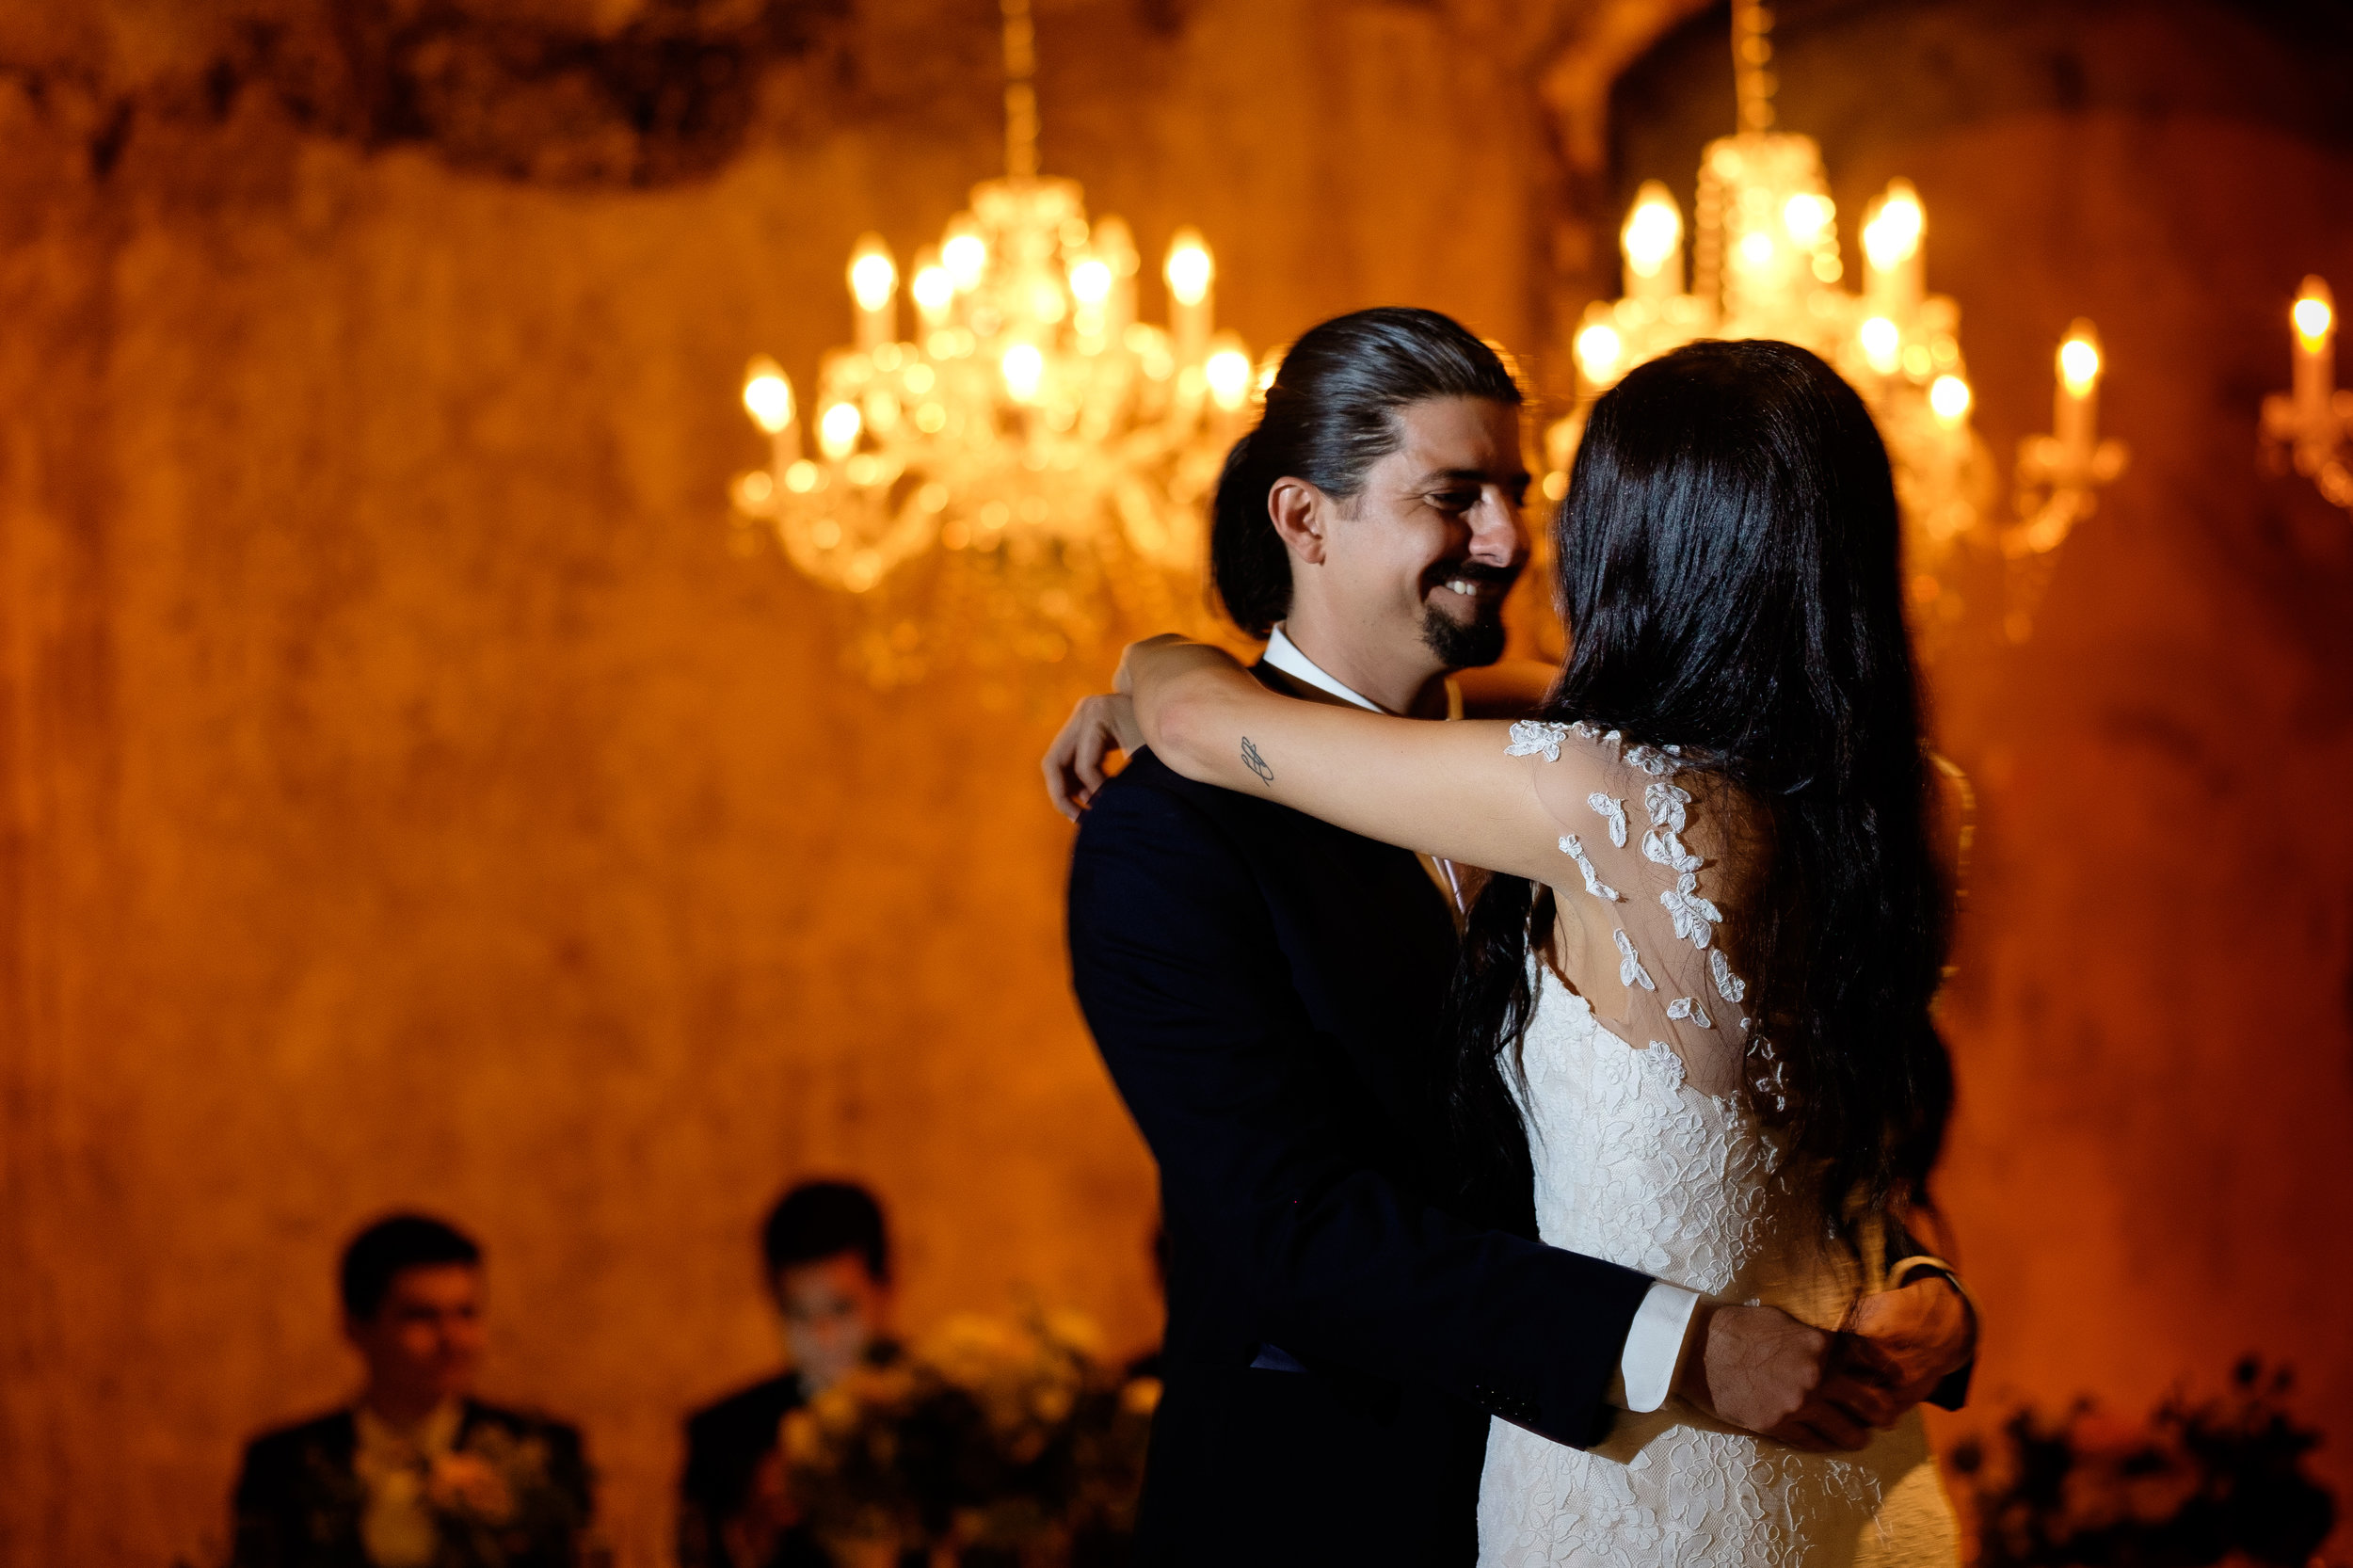  This is one of my favourite first dance images from this year, I love the contrast of the Danielle + Felipe with the warm tones in the background.  Plus, check out his expression.... that's one happy groom! 